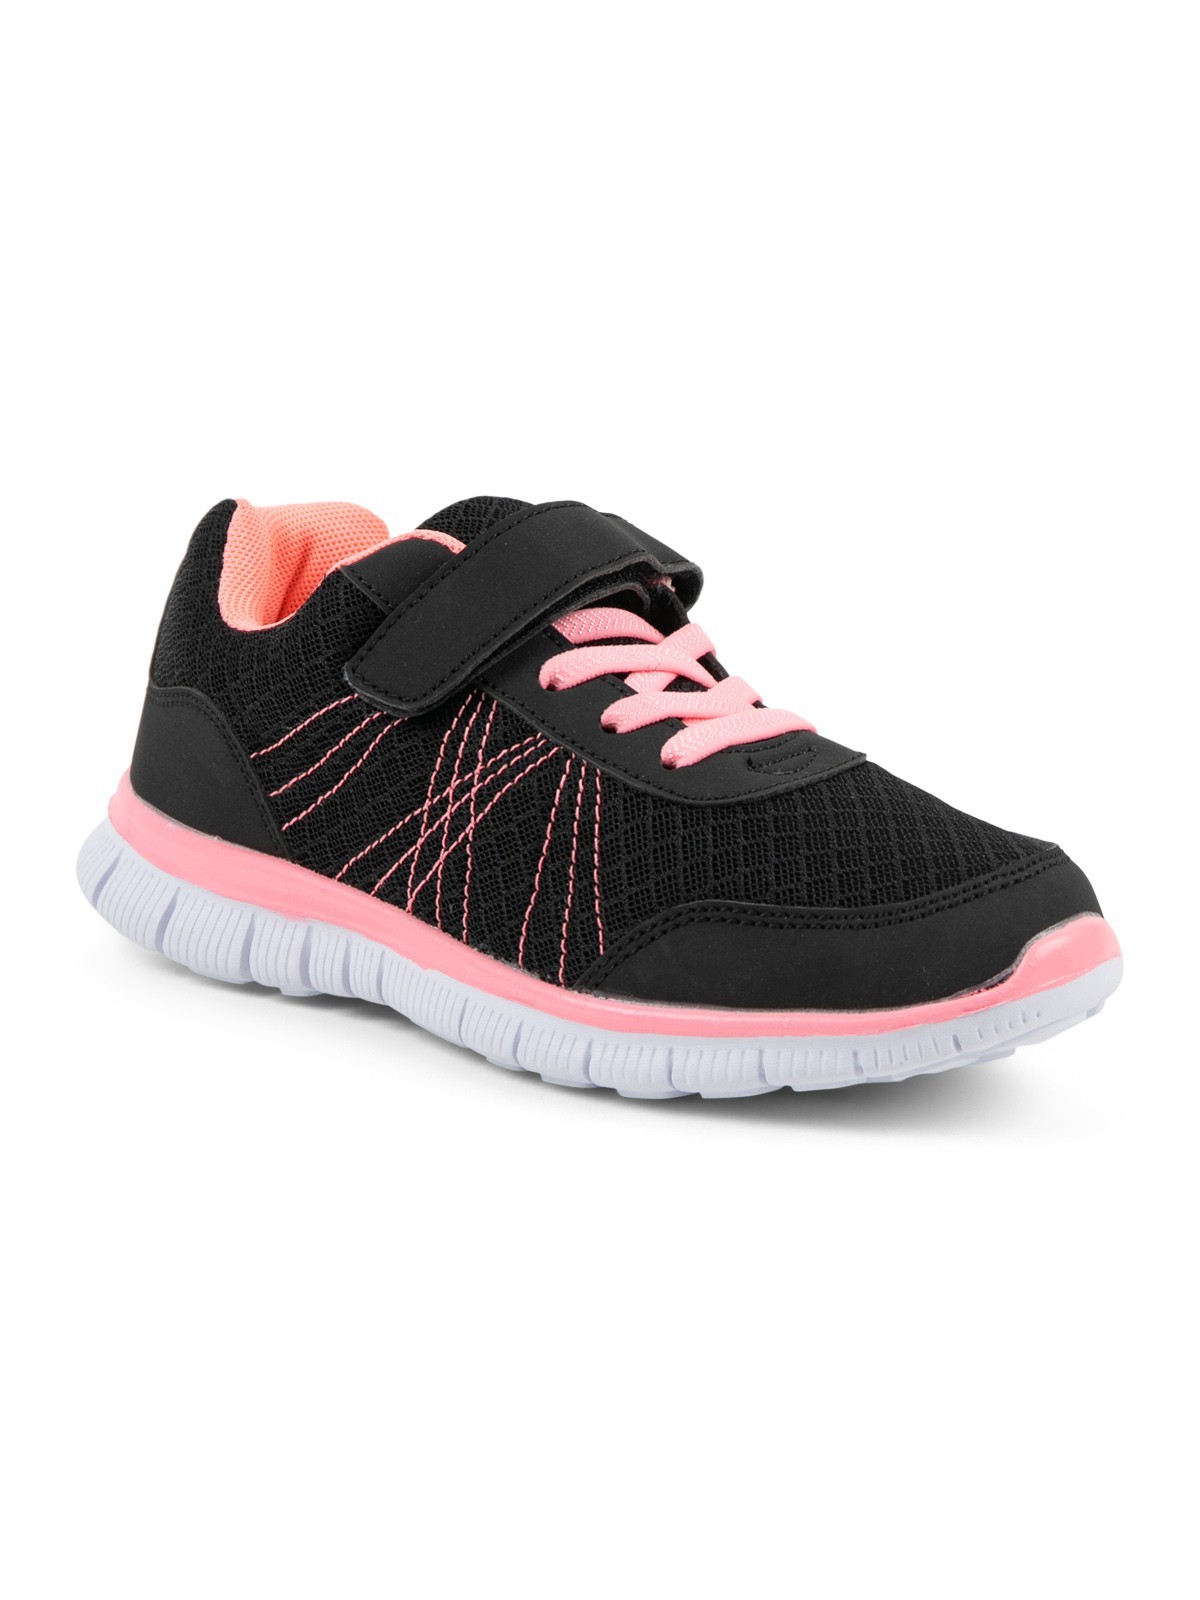 chaussure fille nike 31